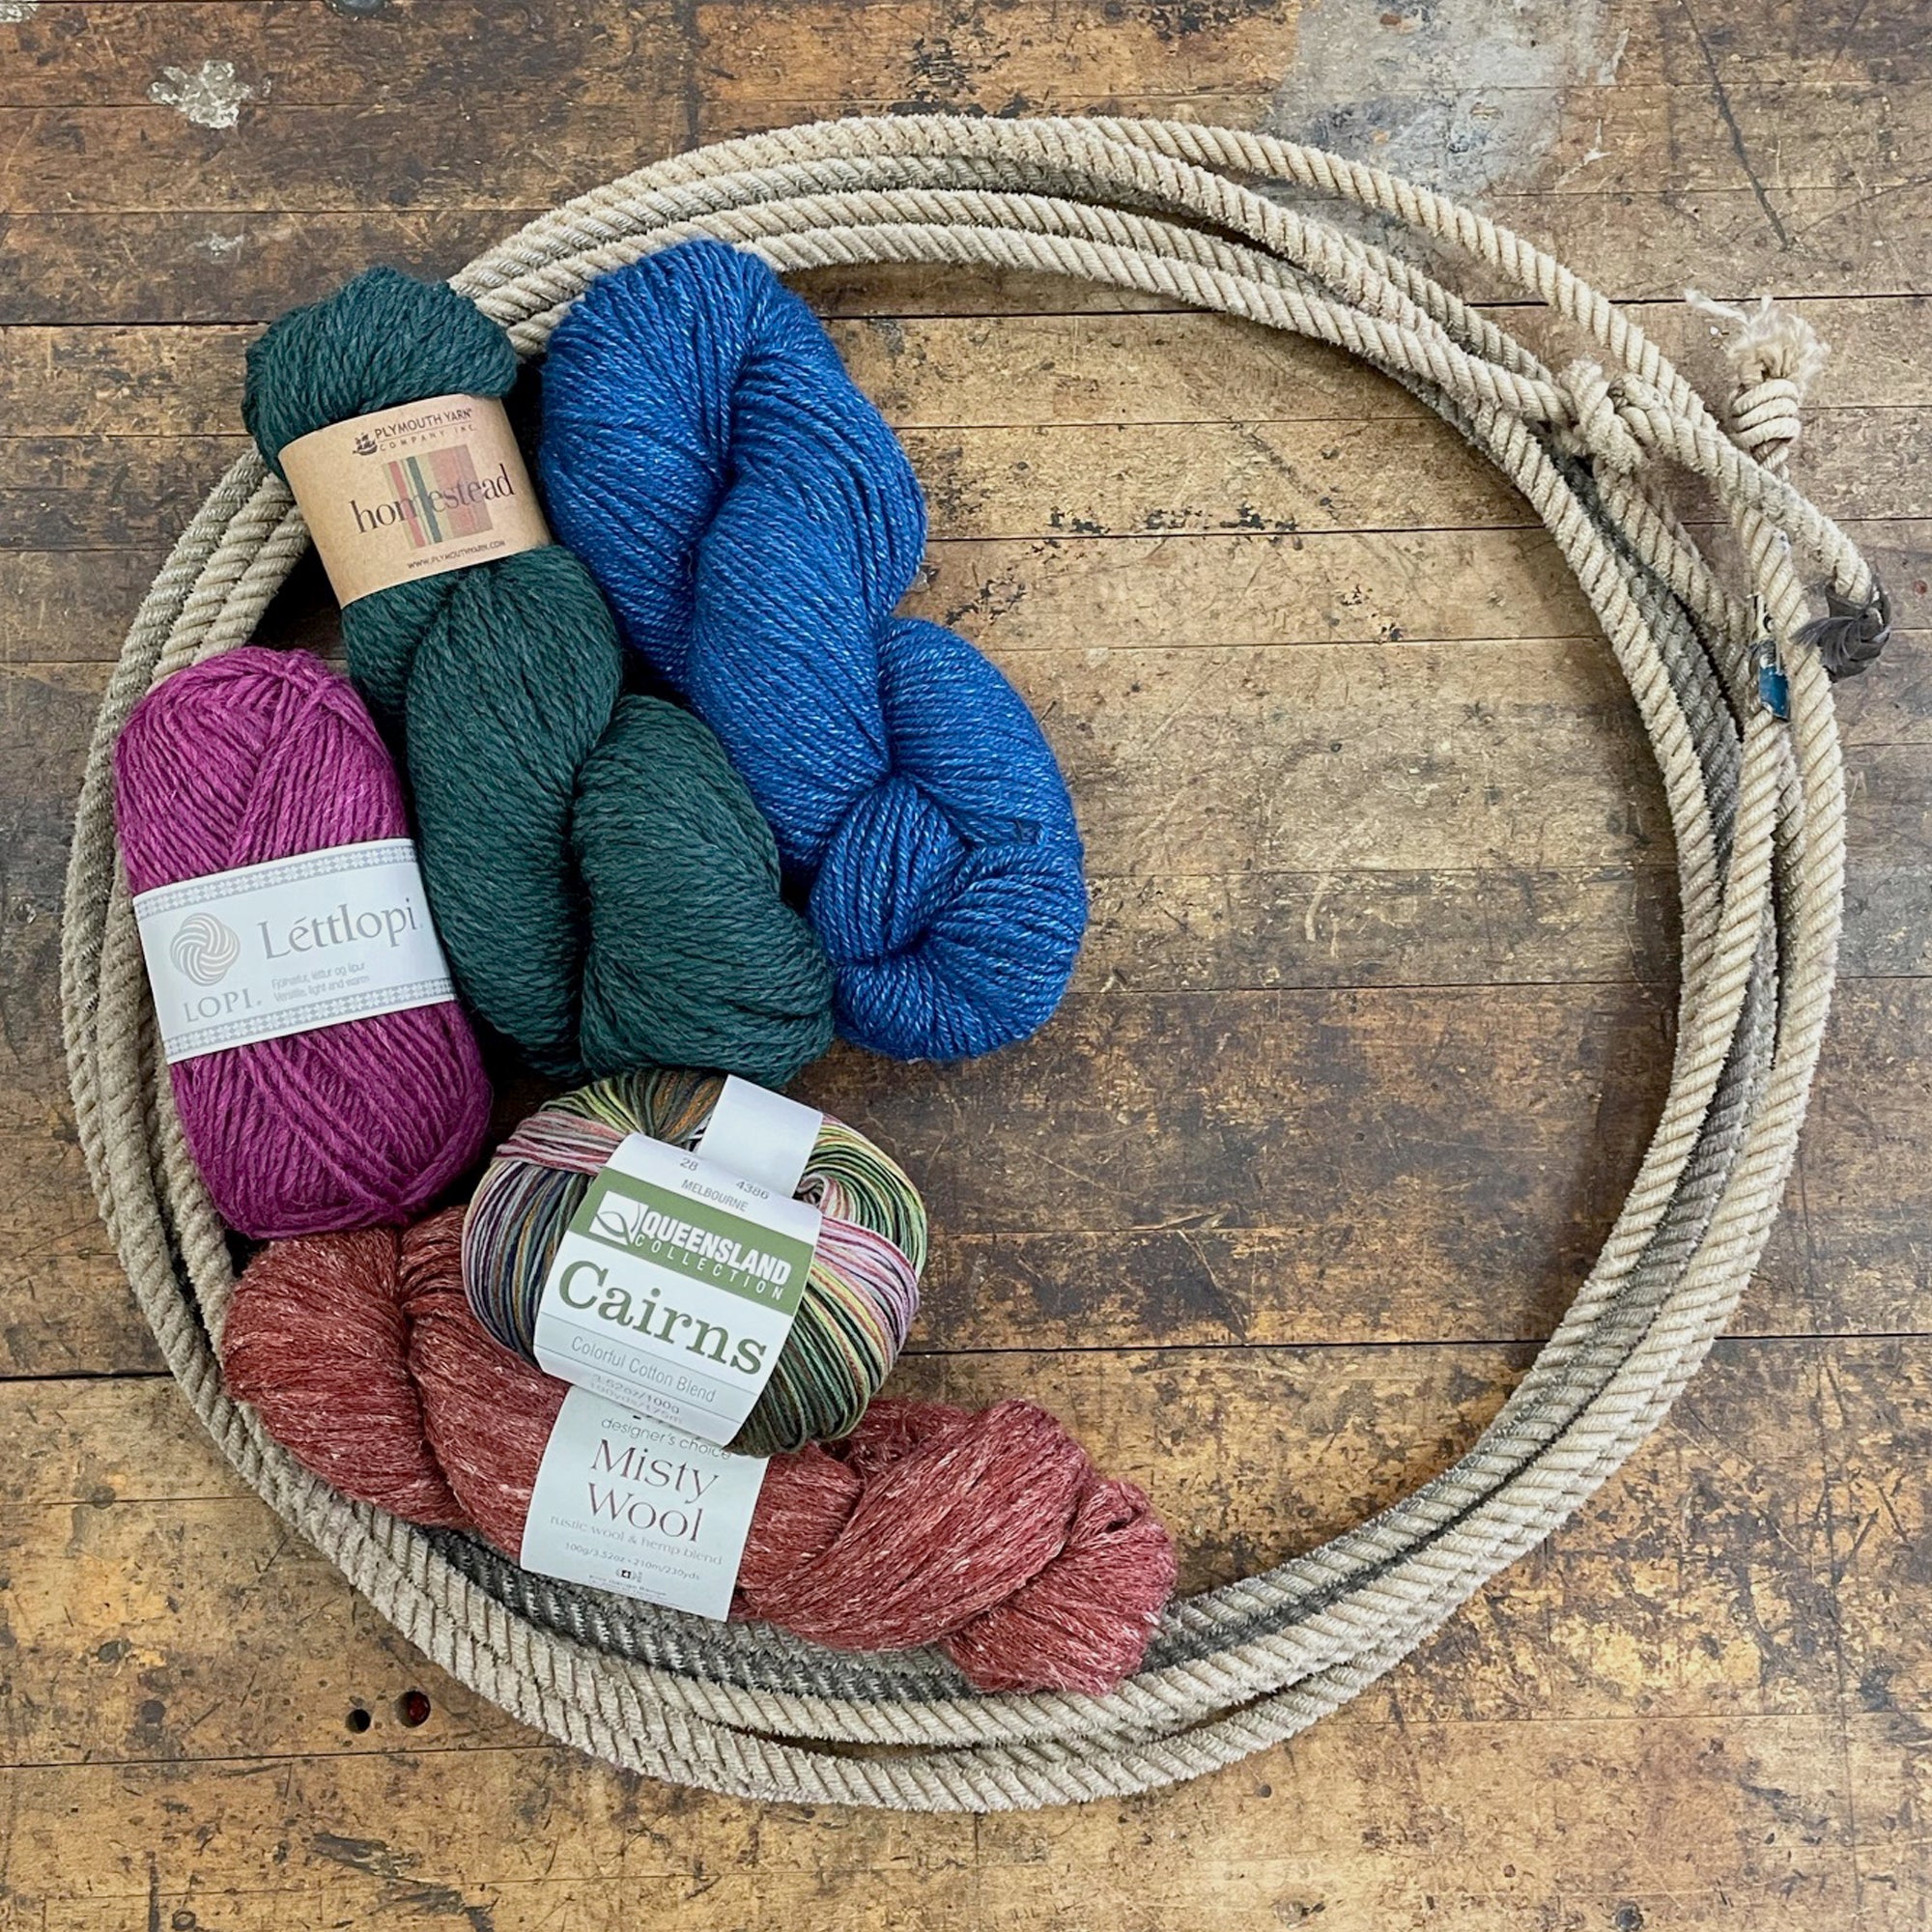 The Online Store for Cowgirl Yarn, located in Laramie, Wyoming